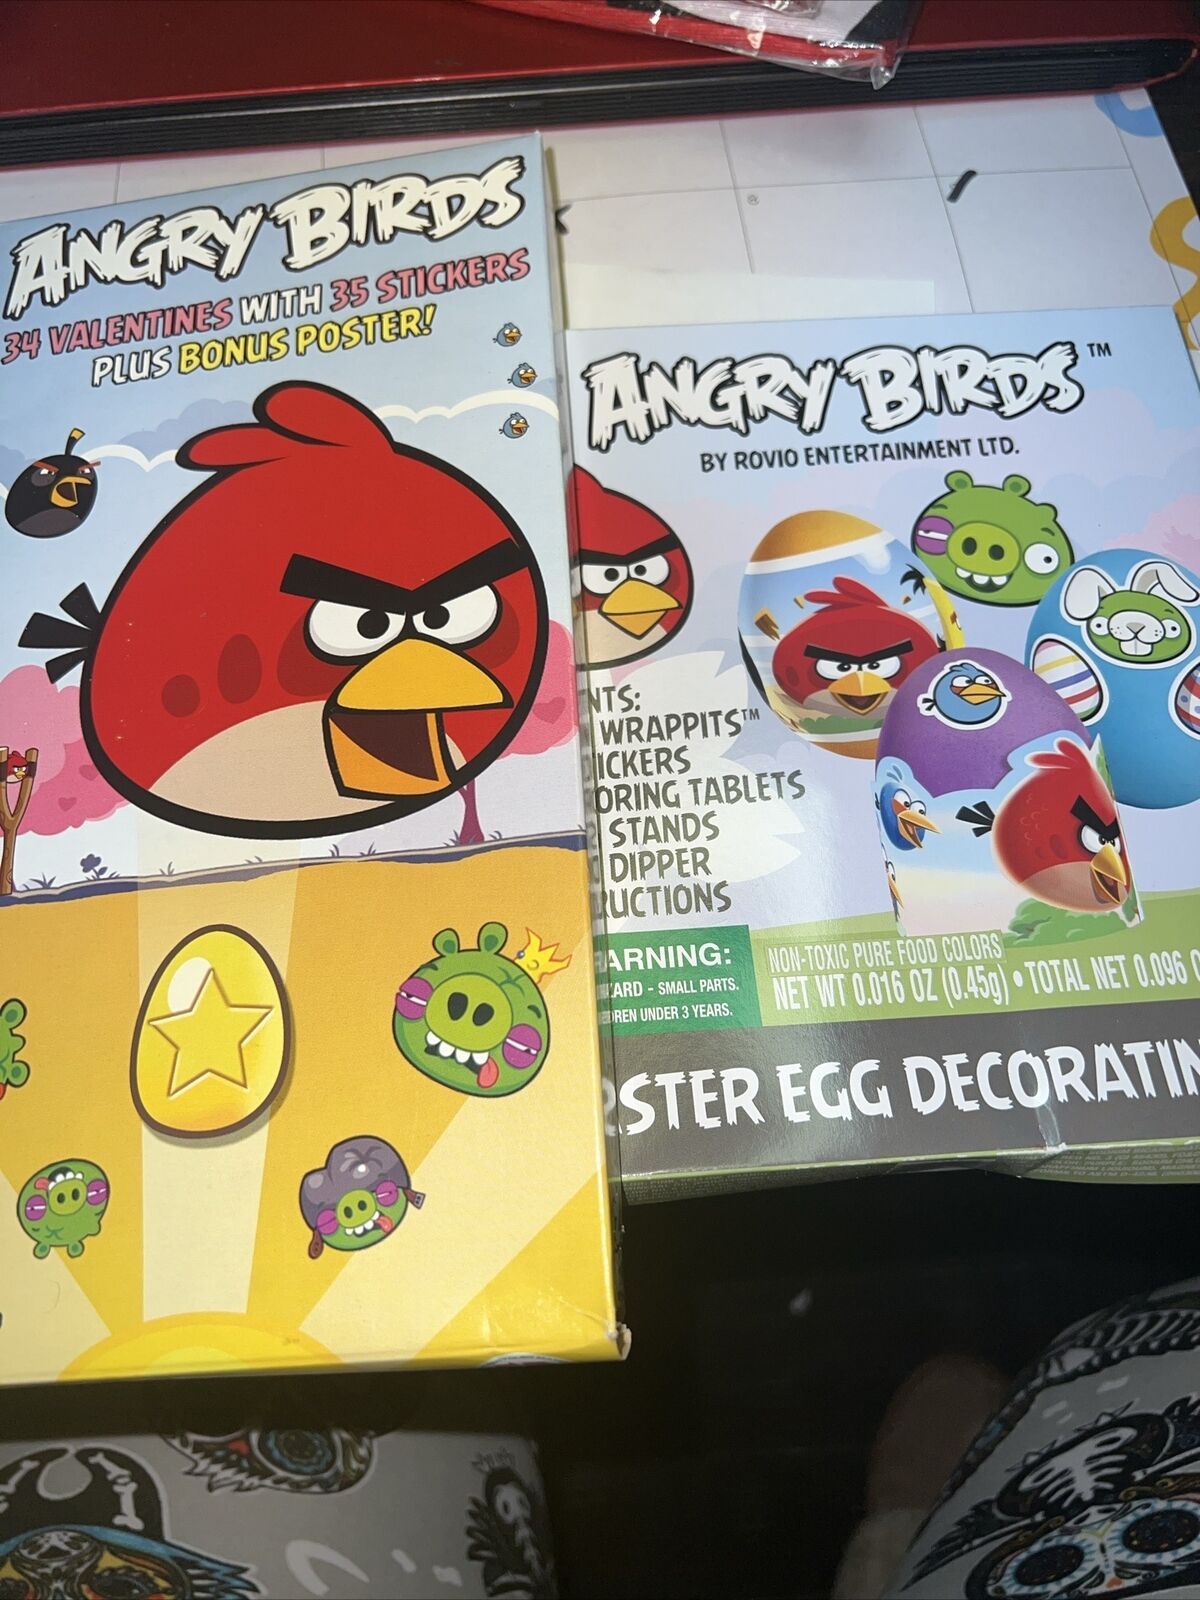 34 ANGRY BIRDS Valentines with 35 Stickers Plus Poster by Paper Magic/ Easter Eg